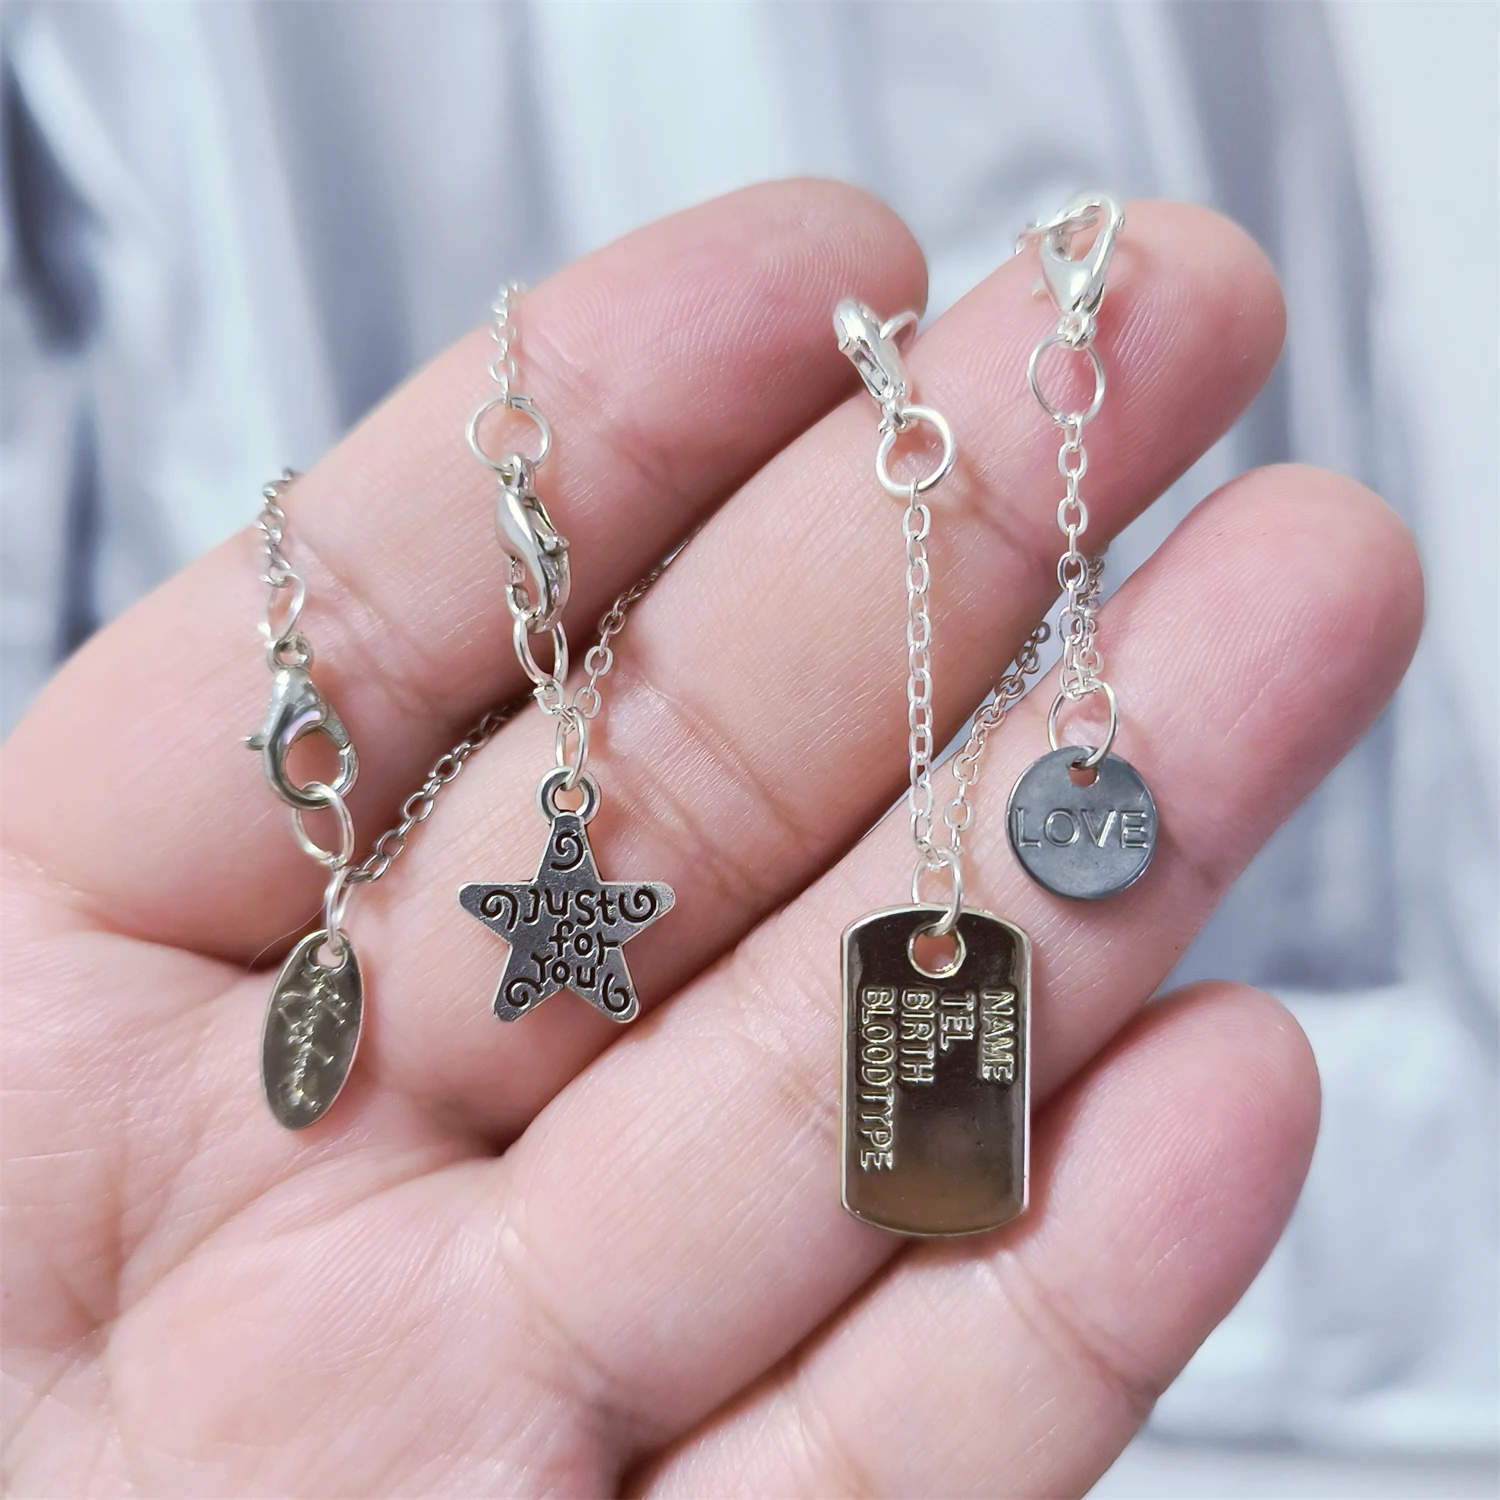 For BJD 1/6 1/12 Scale Blyth OB11 Doll Size Simulation Text Necklace Mini Tiny Accessories Decoration Alloy Prop Fashion